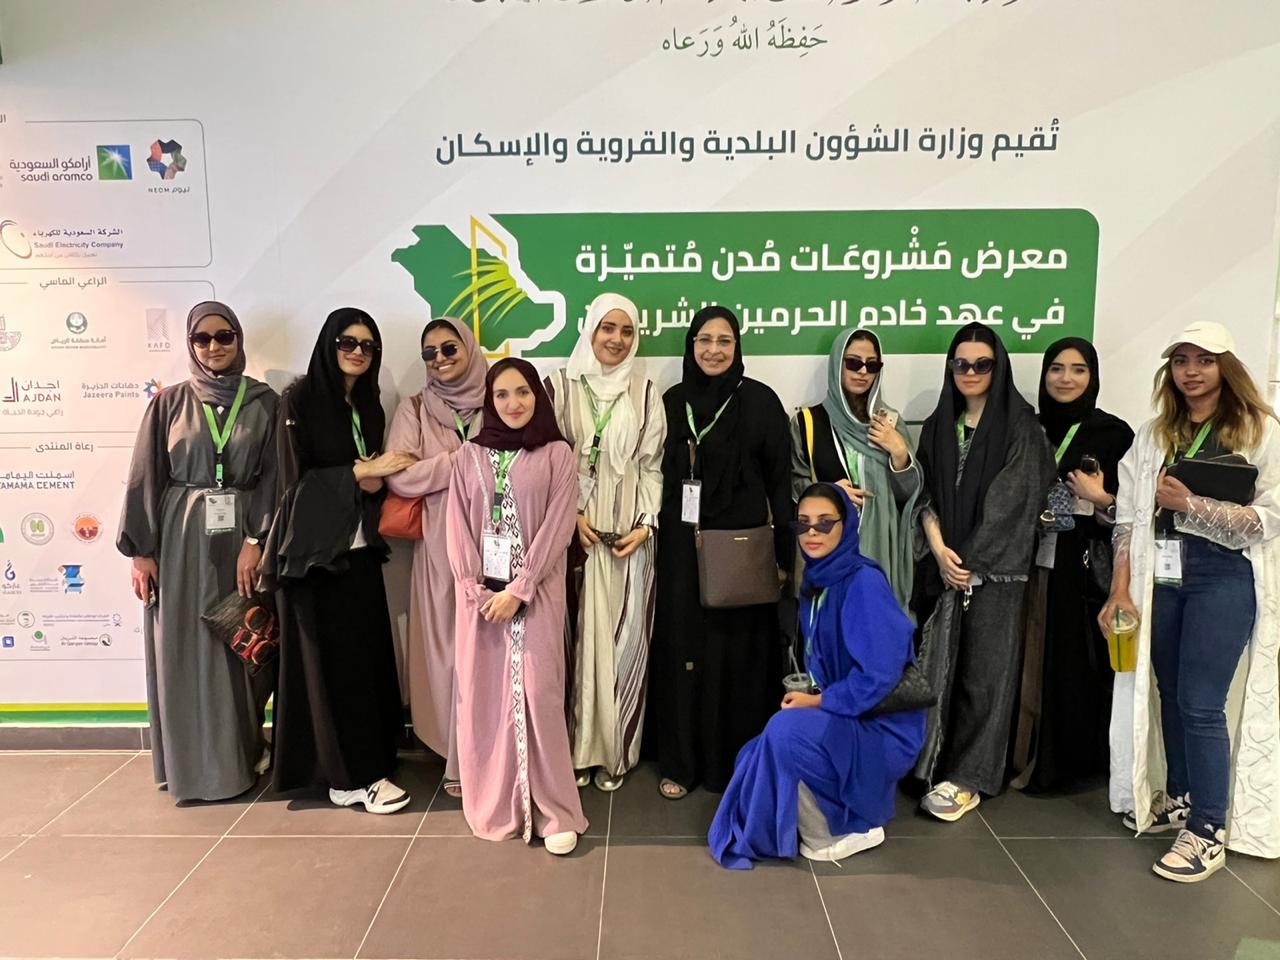 Students visit to the Exhibition of Projects of Distinguished Cities During the Reign of the Custodian of the two Holy Mosques King Salman bin Abdul Aziz 2022